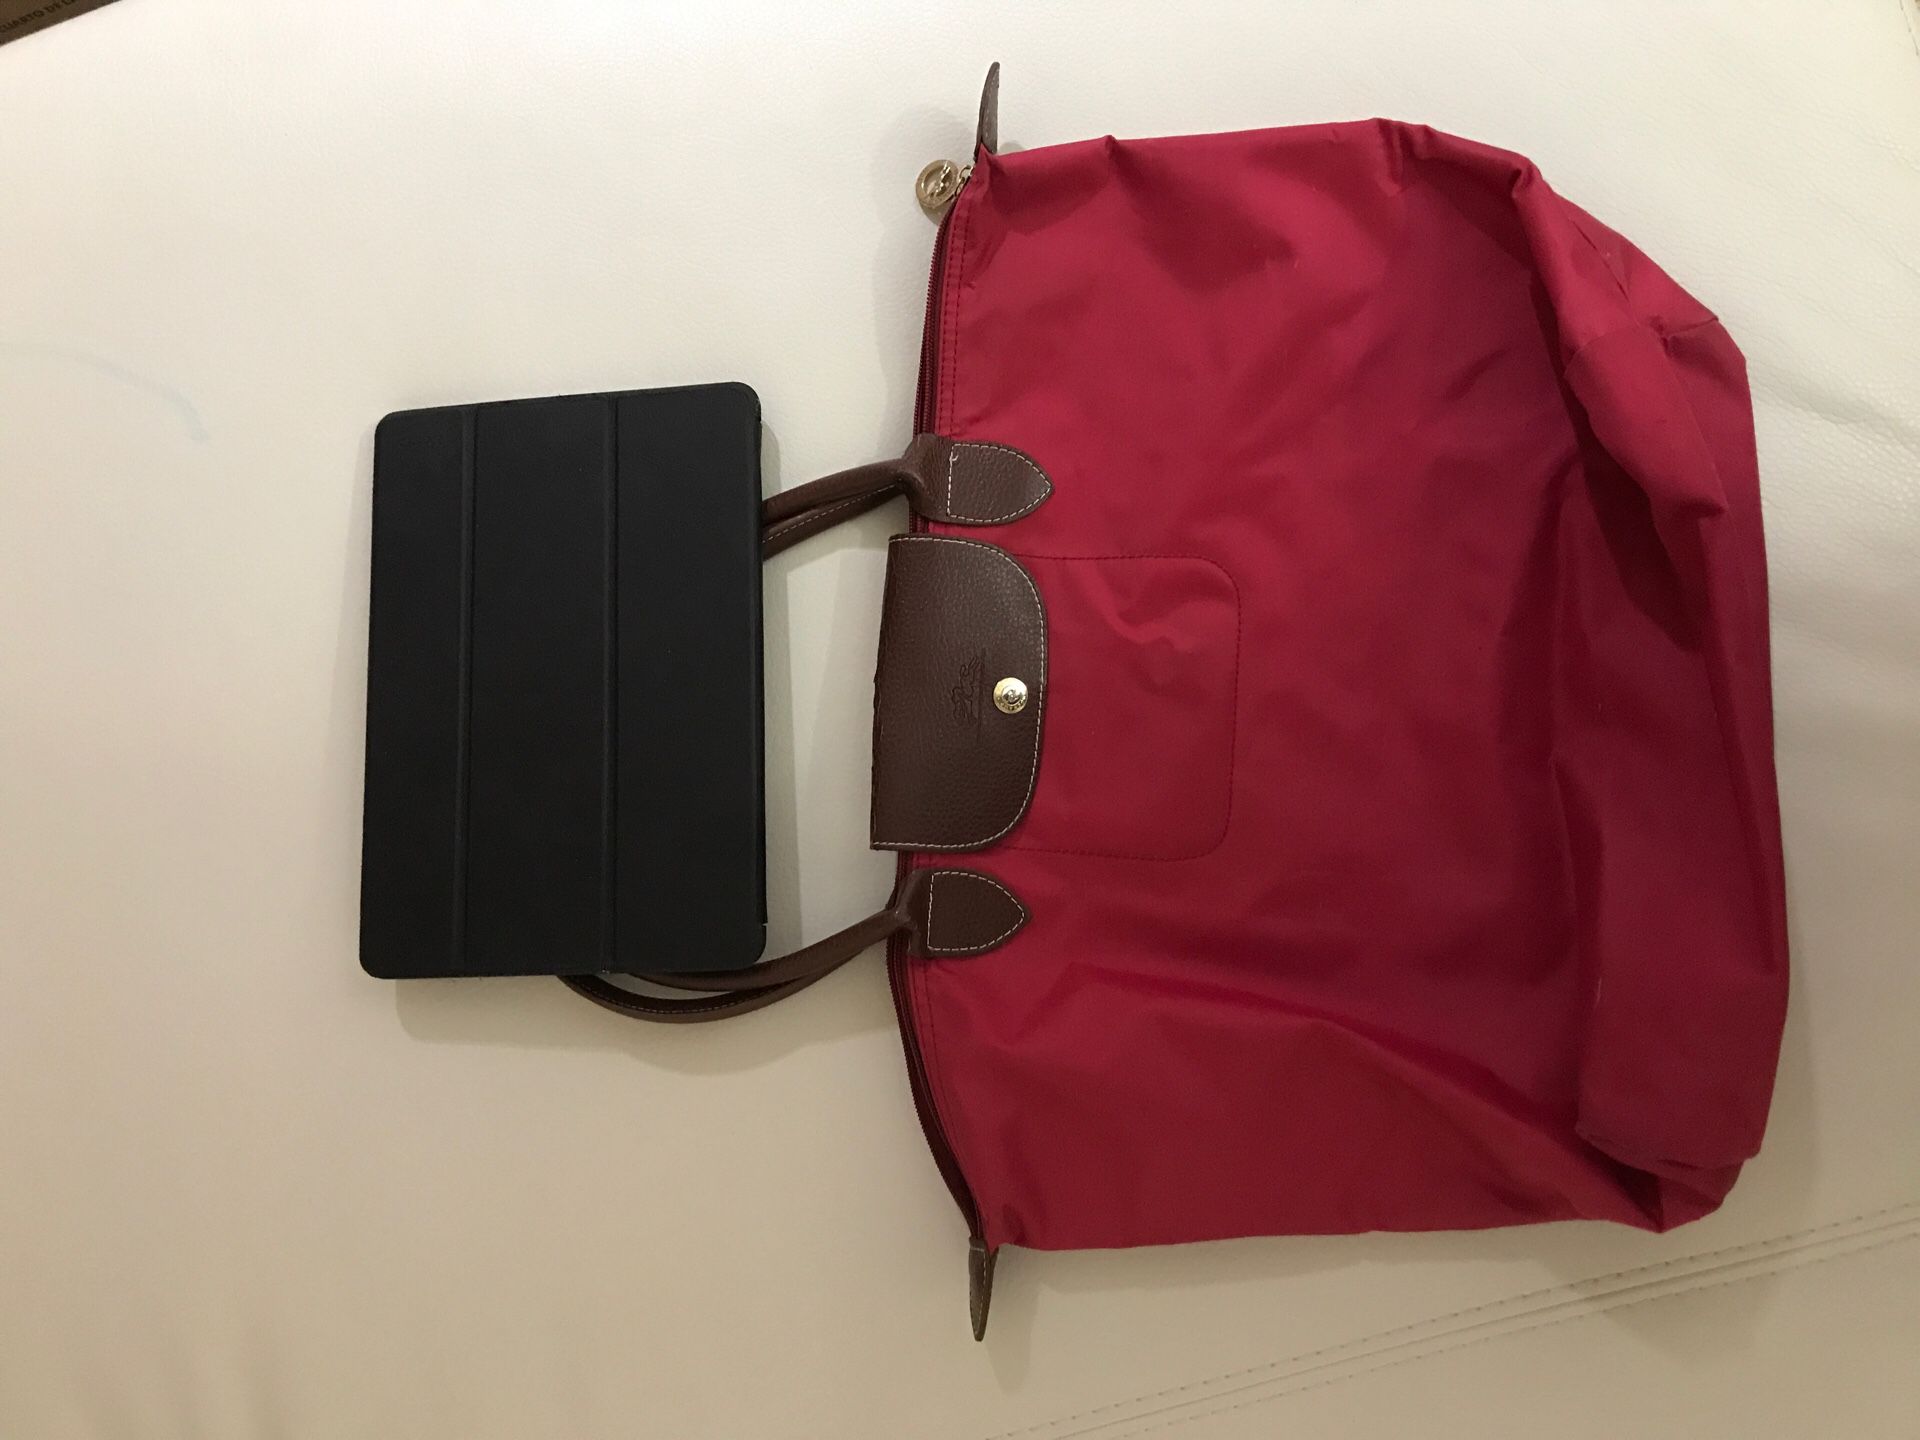 Longchamp [Used Condition] Used Bag, perfect for carrying books and iPads - No filter is used in pictures!!